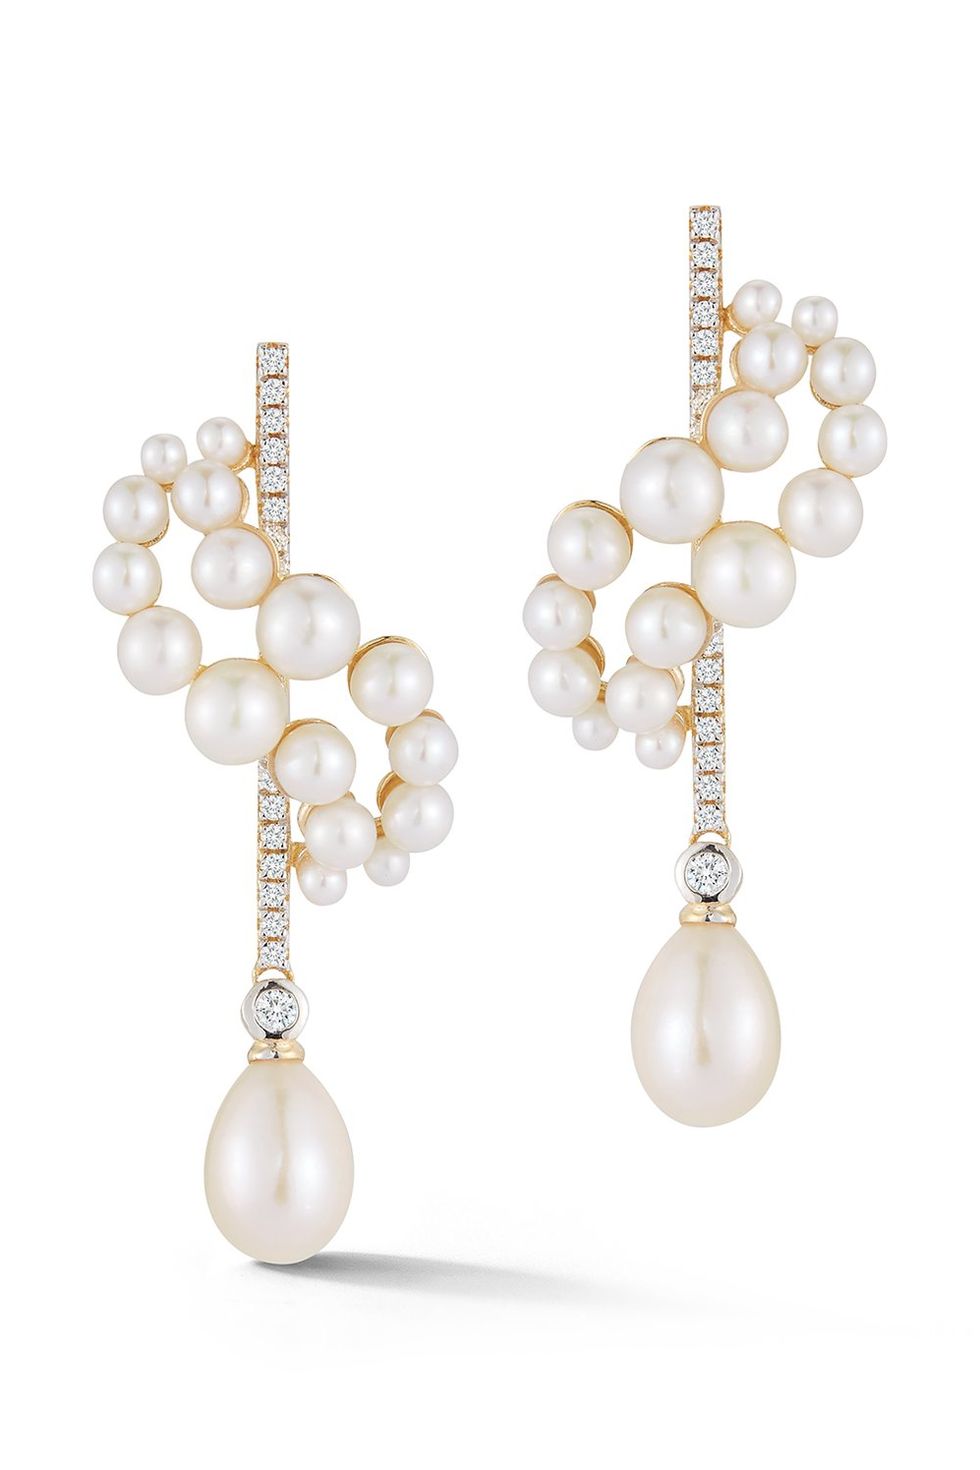 14kt Gold Pearl Curve Form Earrings 